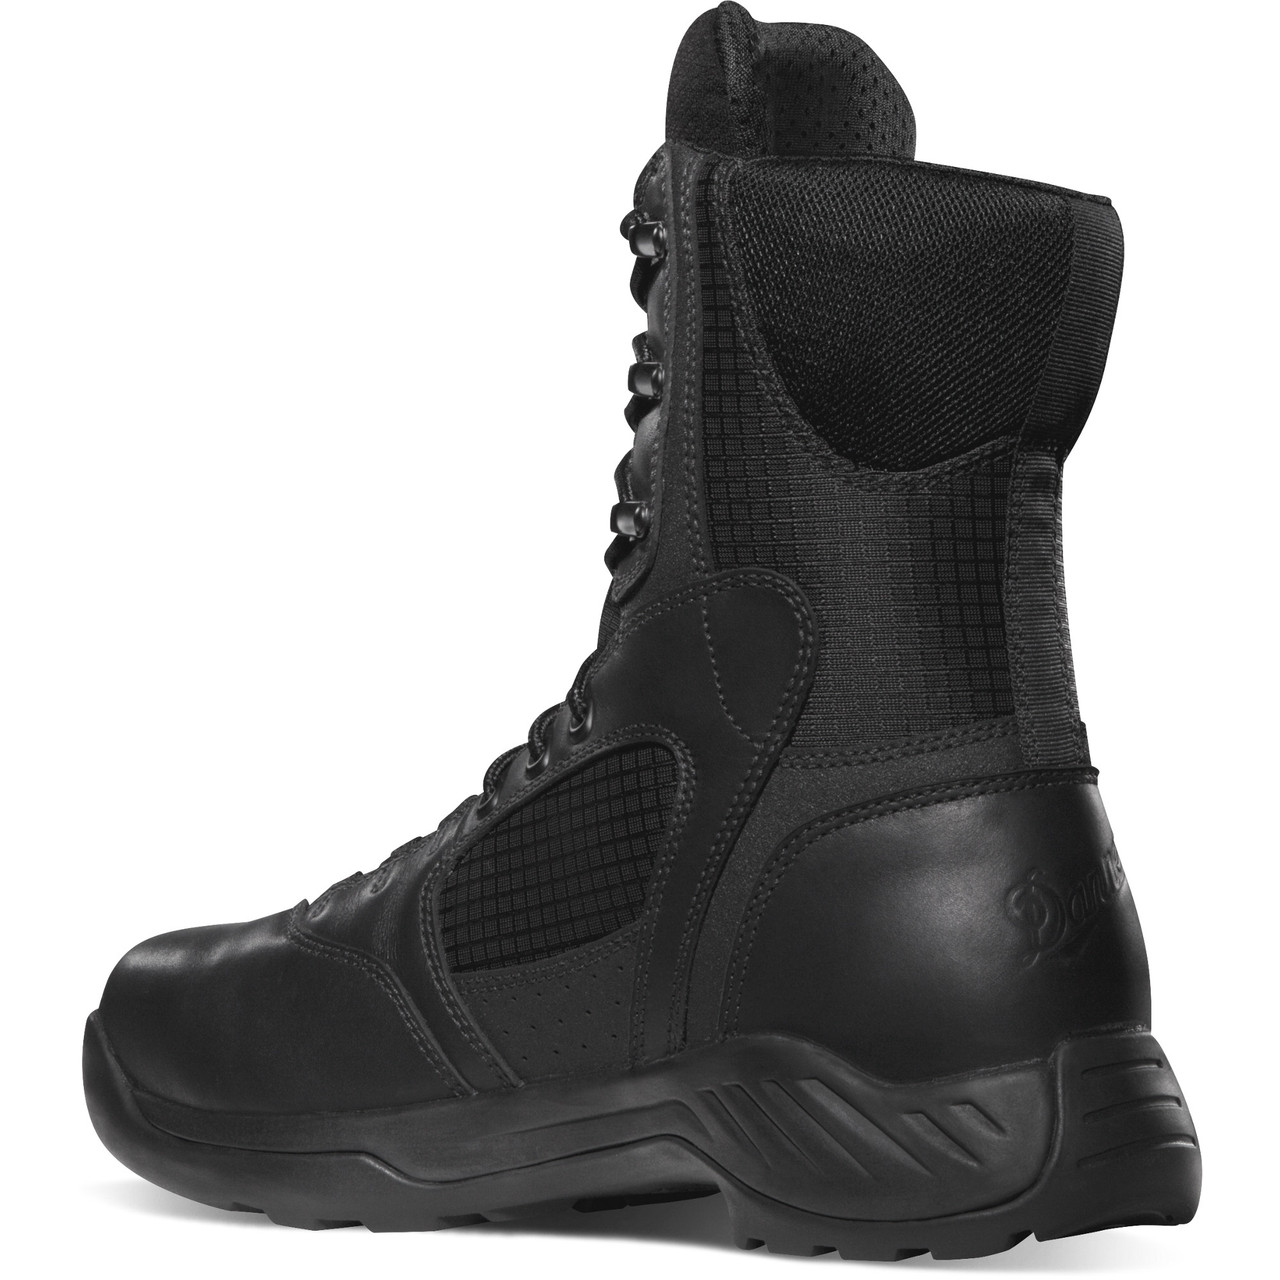 DANNER® KINETIC 8" TACTICAL BOOTS 28010 